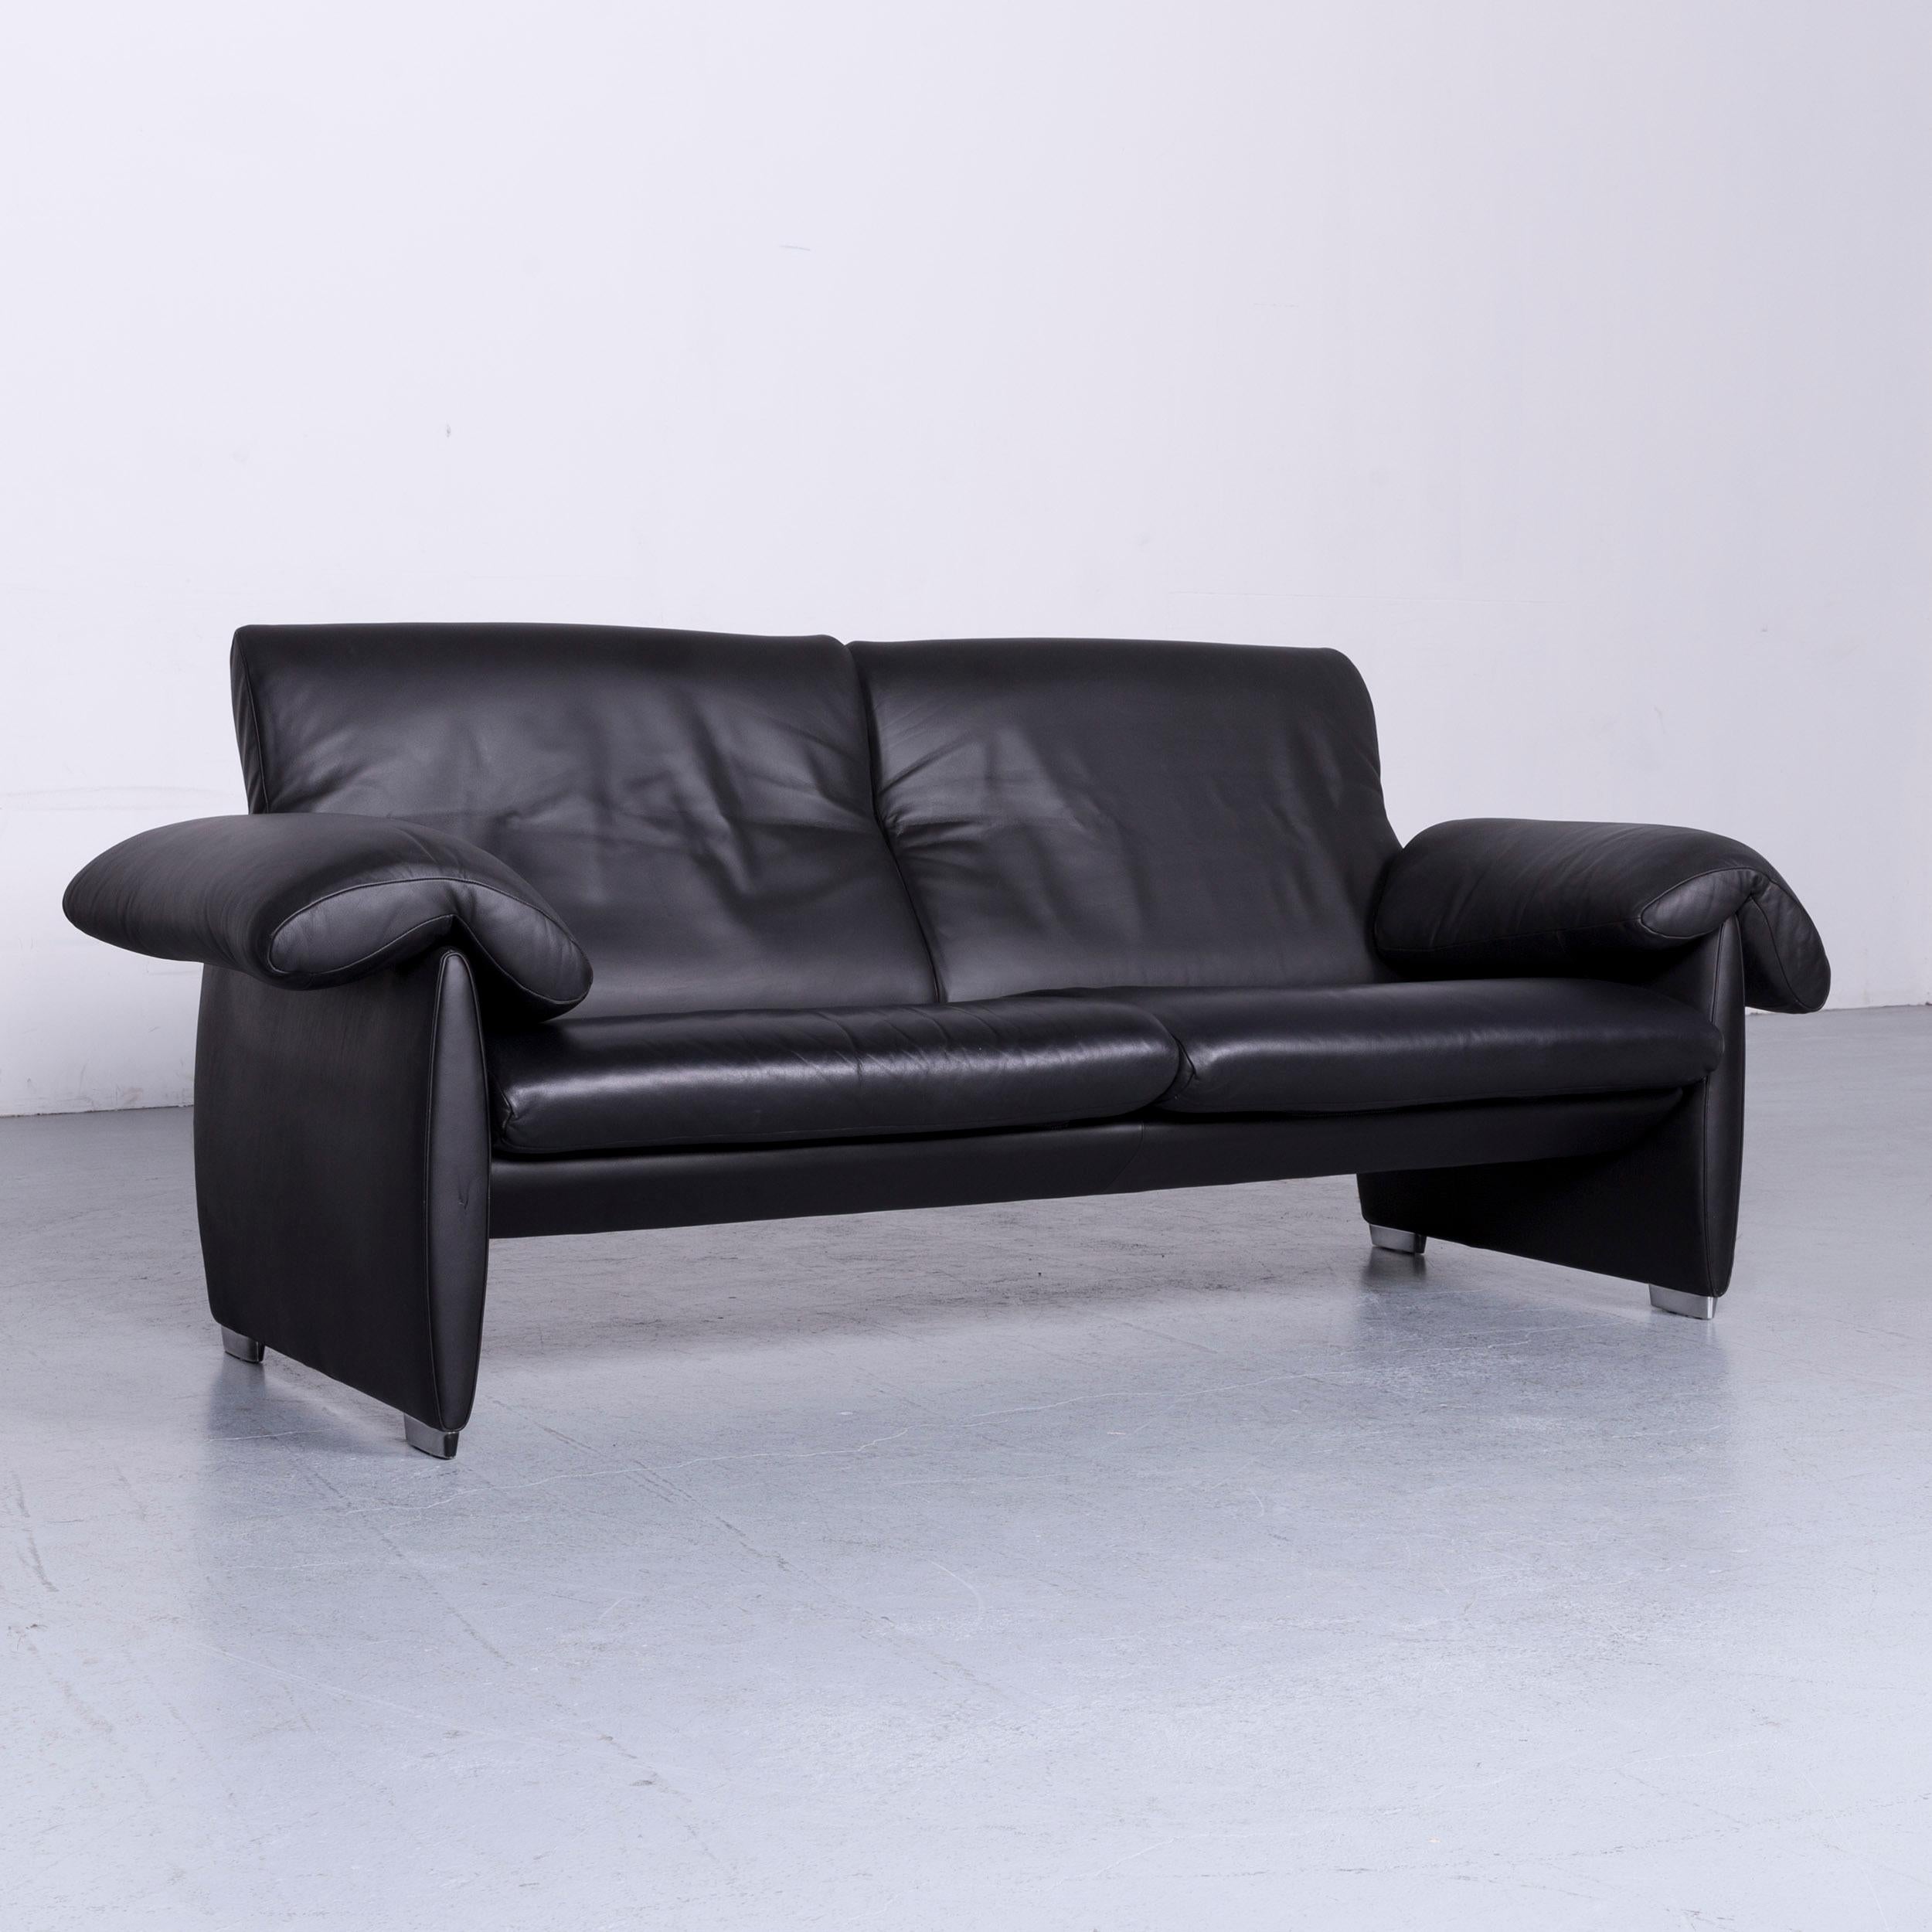 We bring to you an De Sede DS 10 designer sofa black leather three-seat couch.